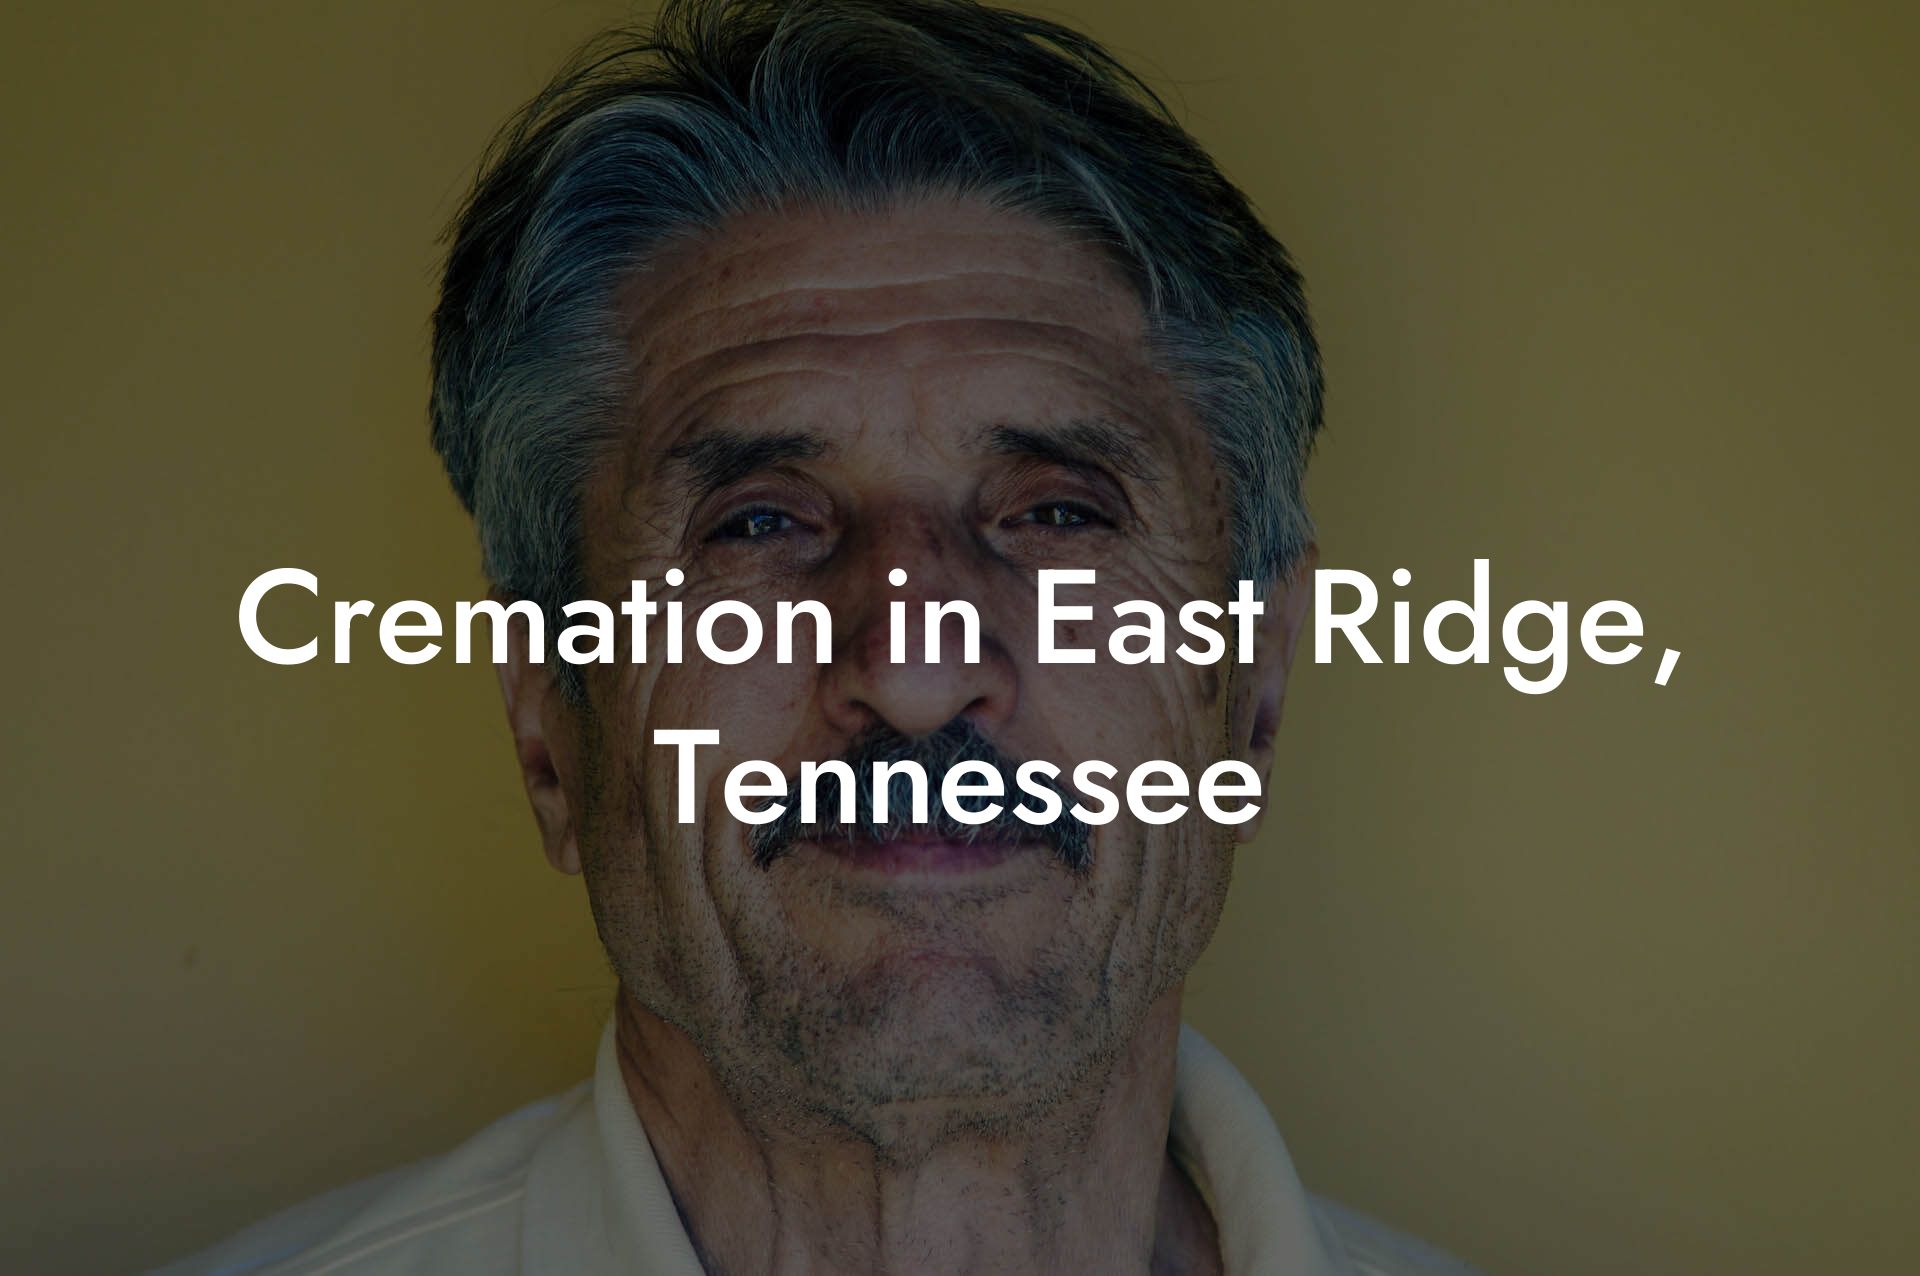 Cremation in East Ridge, Tennessee